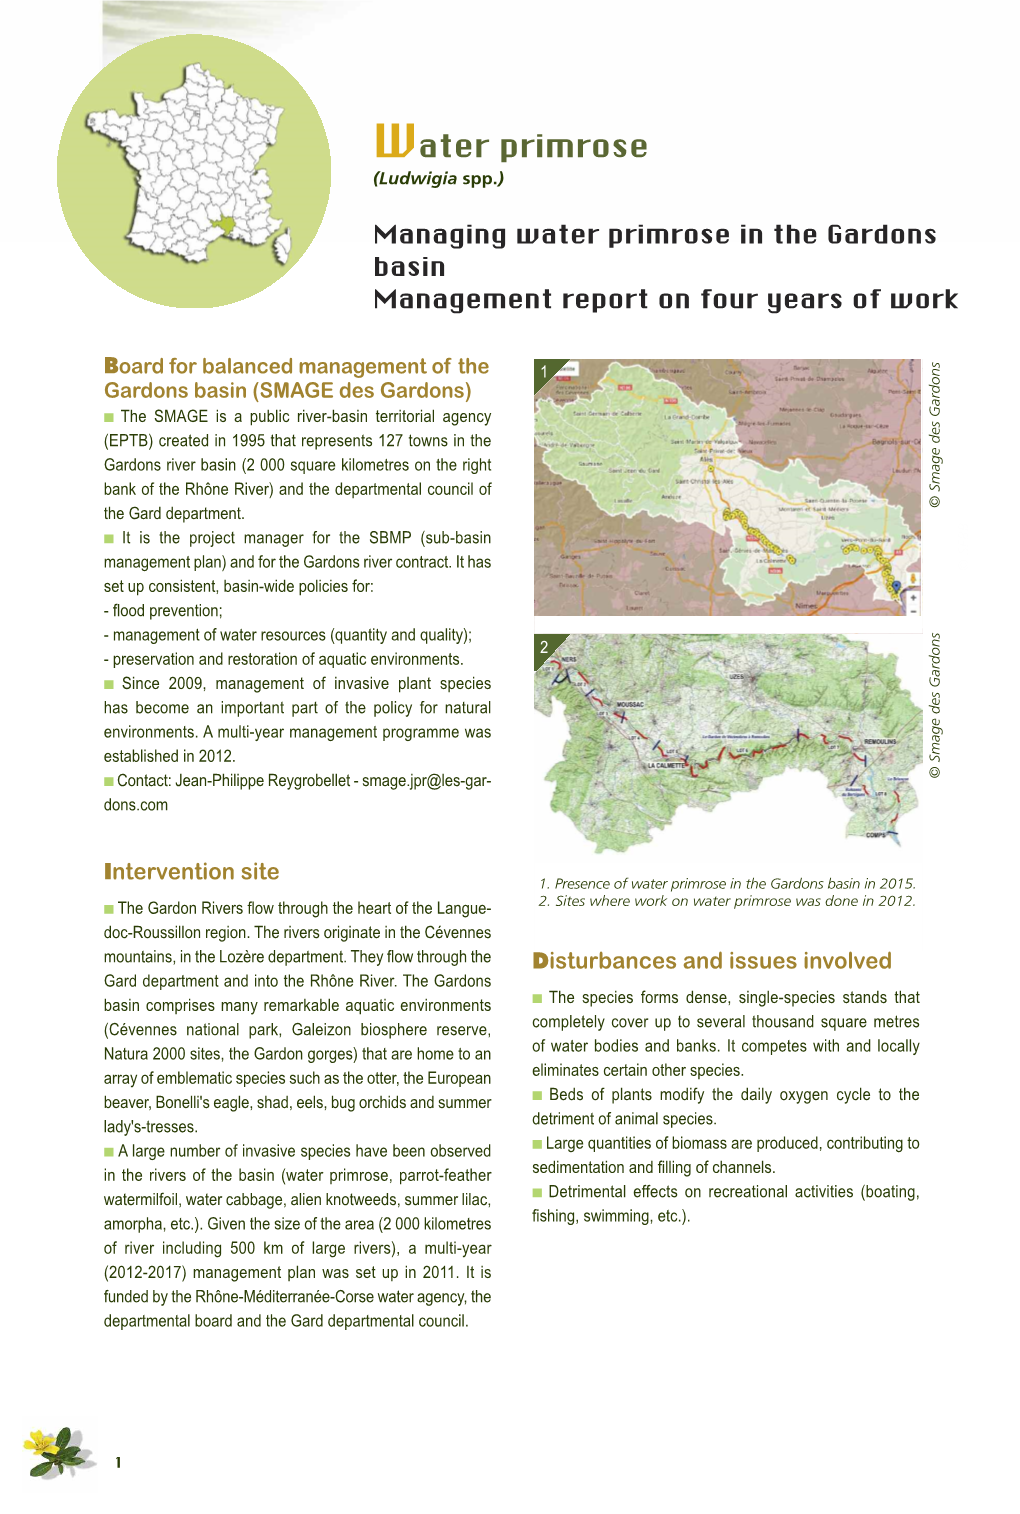 Managing Water Primrose in the Gardons Basin Management Report on Four Years of Work